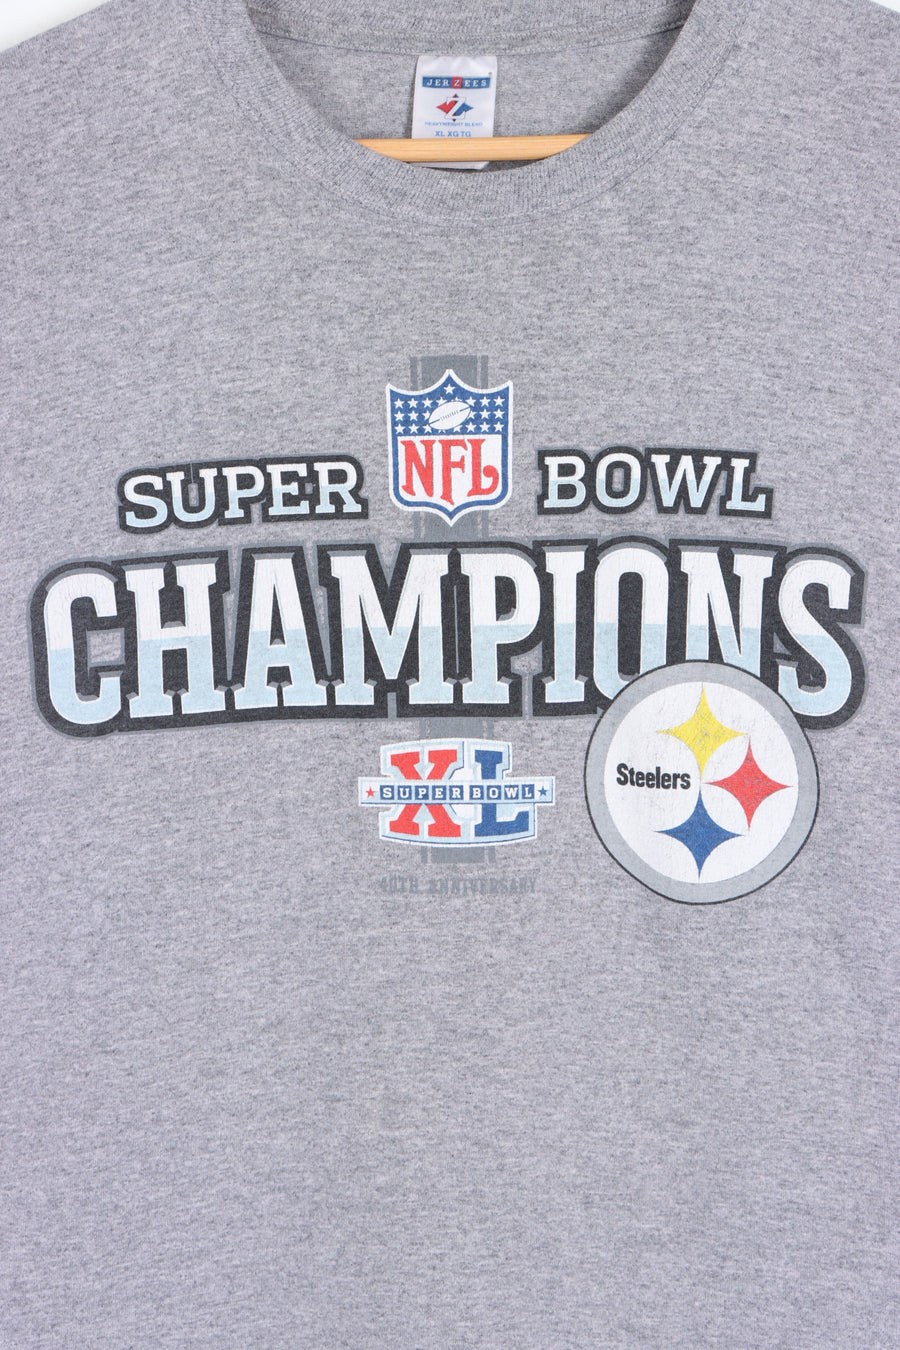 NFL Pittsburgh Steelers 40th Anniversary Super Bowl Champions Tee (XL) - Vintage Sole Melbourne